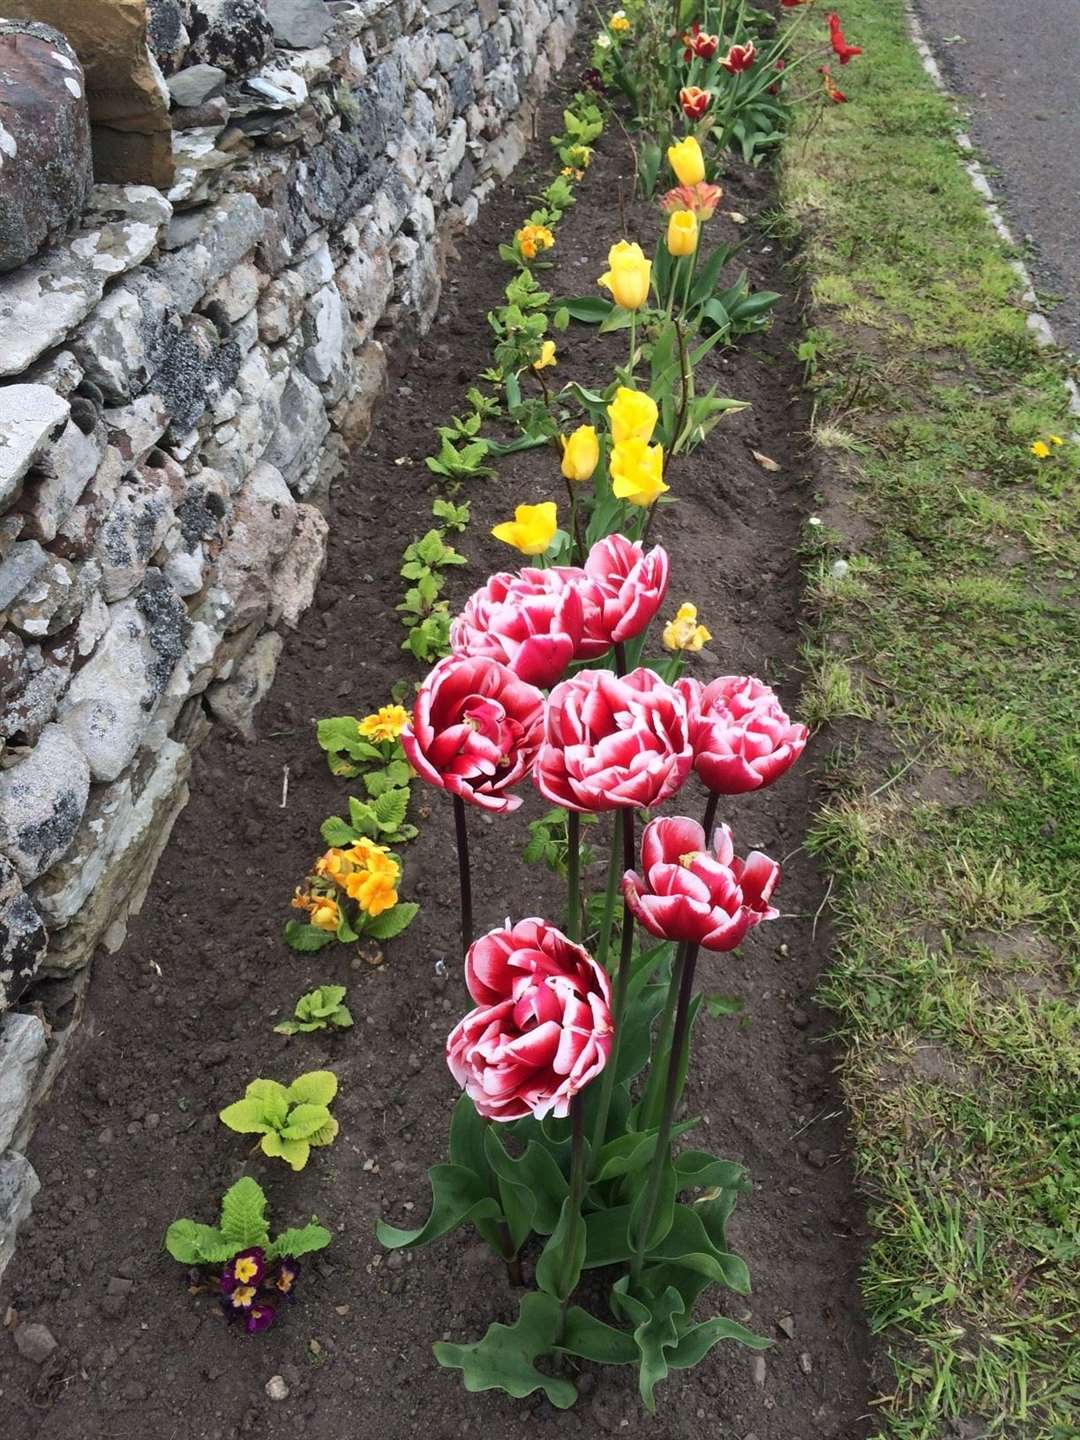 A close-up of some of the tulips.